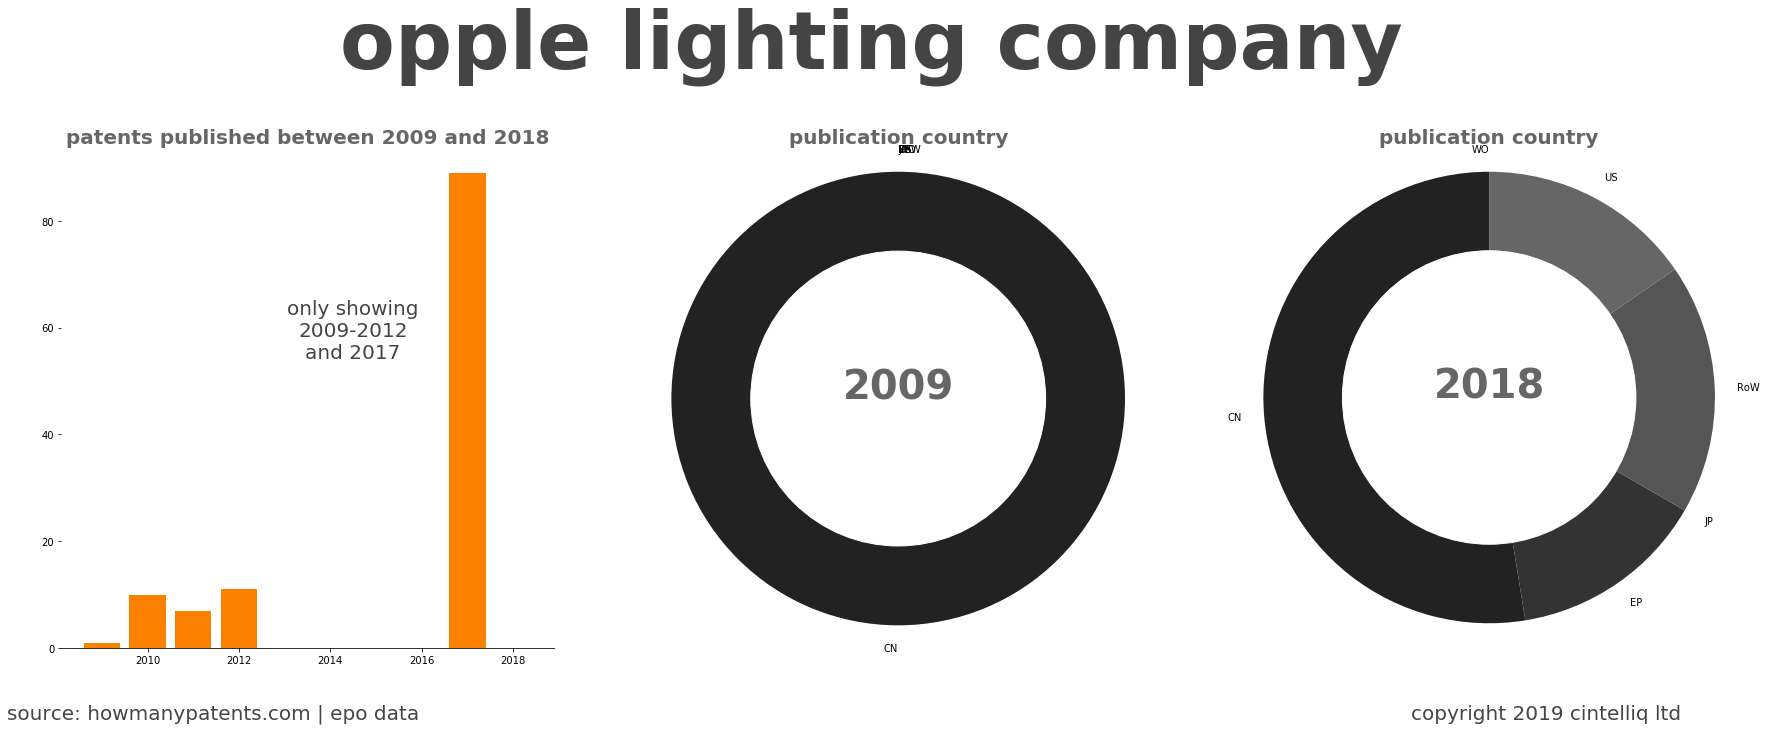 summary of patents for Opple Lighting Company